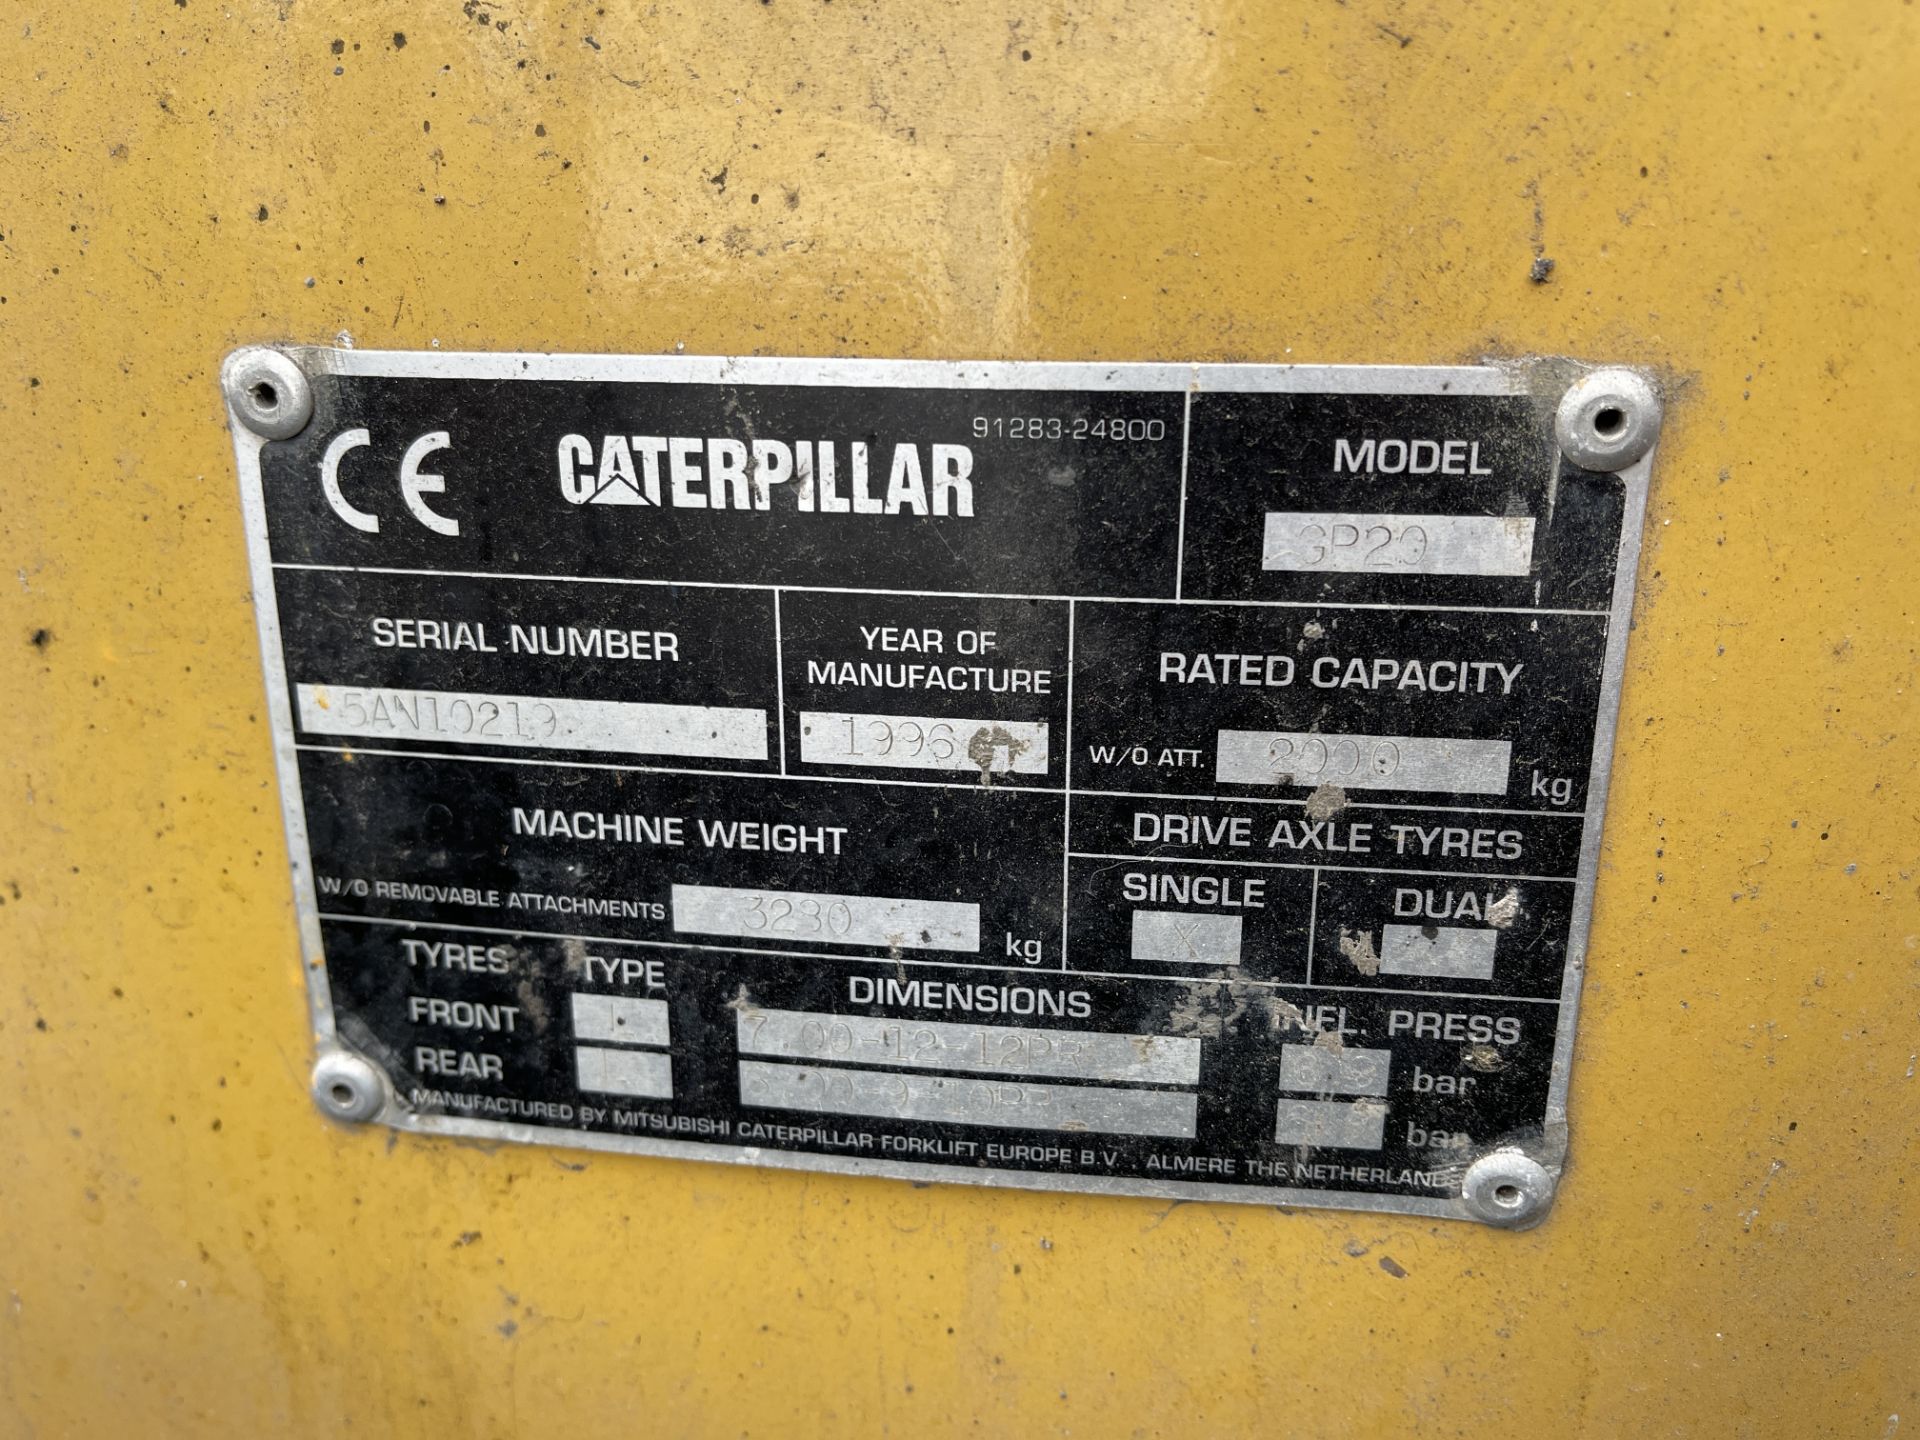 Caterpillar 20, LPG Fork Lift Truck, Serial No. 5AN10210, Rated Capacity 2,000 Kg (1996) - Image 14 of 17